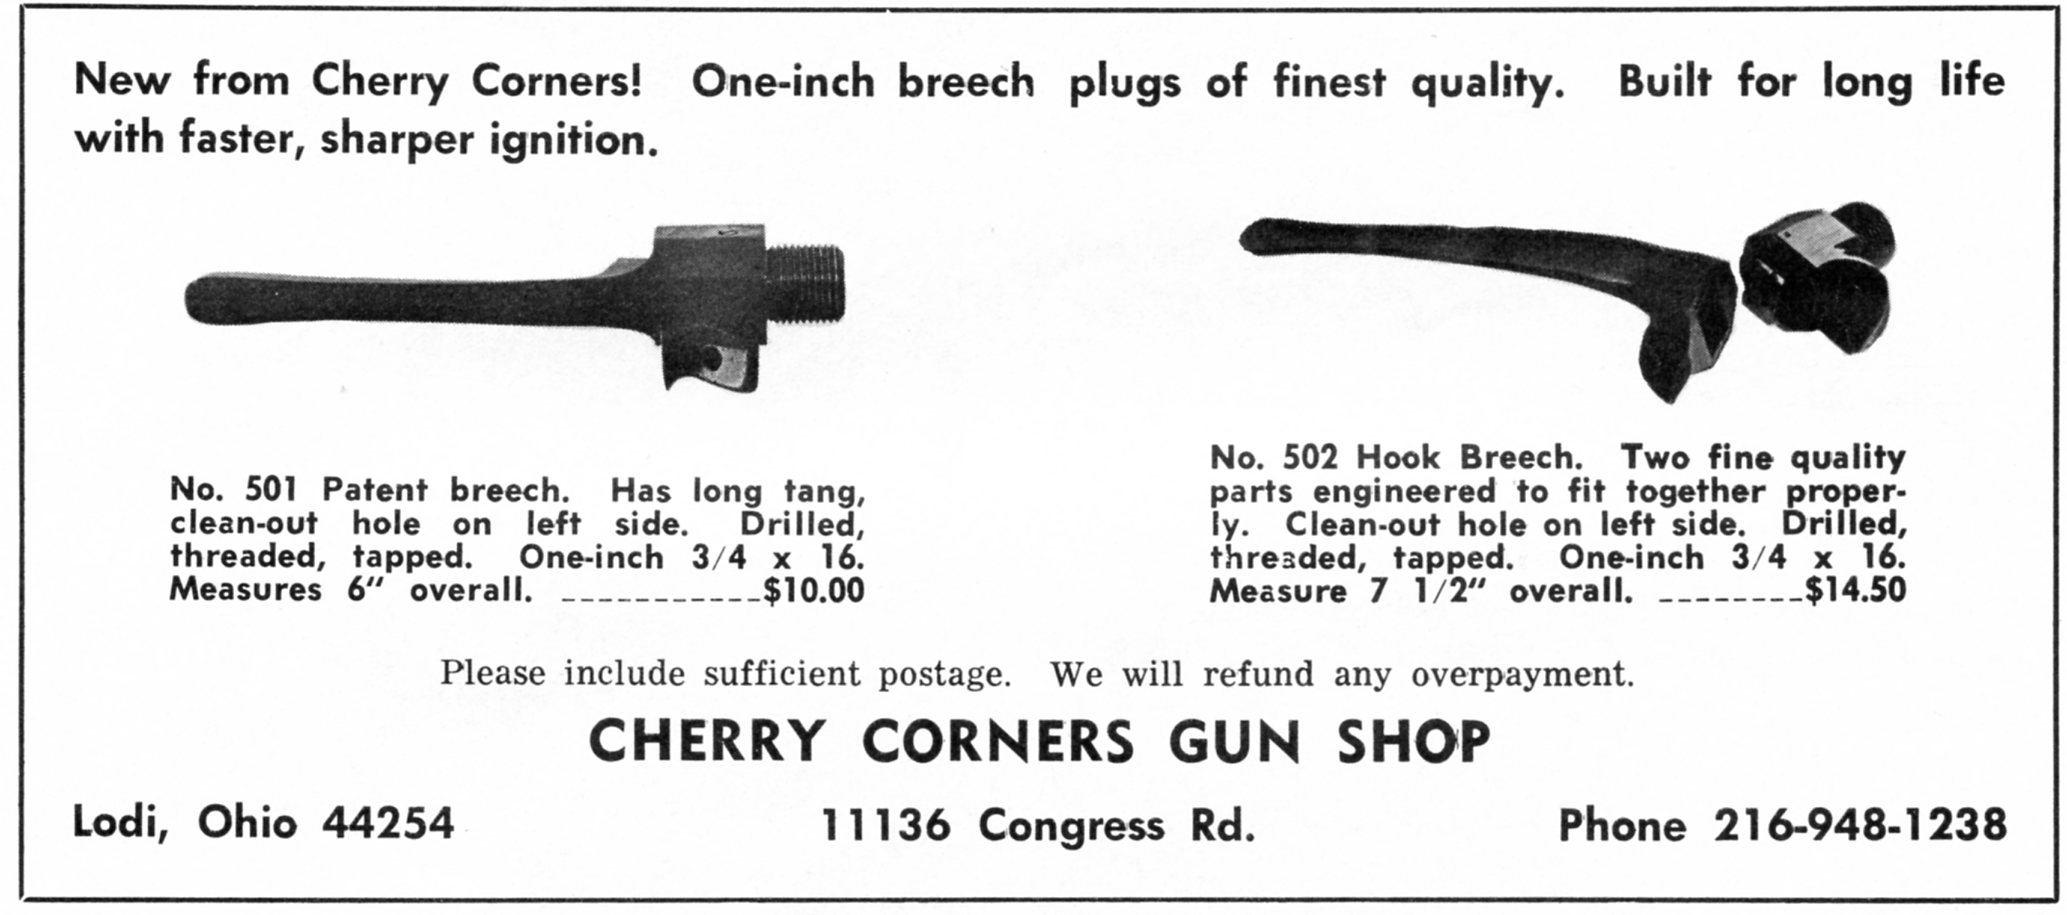 Cherry Corners LEFT Hand Tang only for 1"Hooked Breech  Muzzleloading 